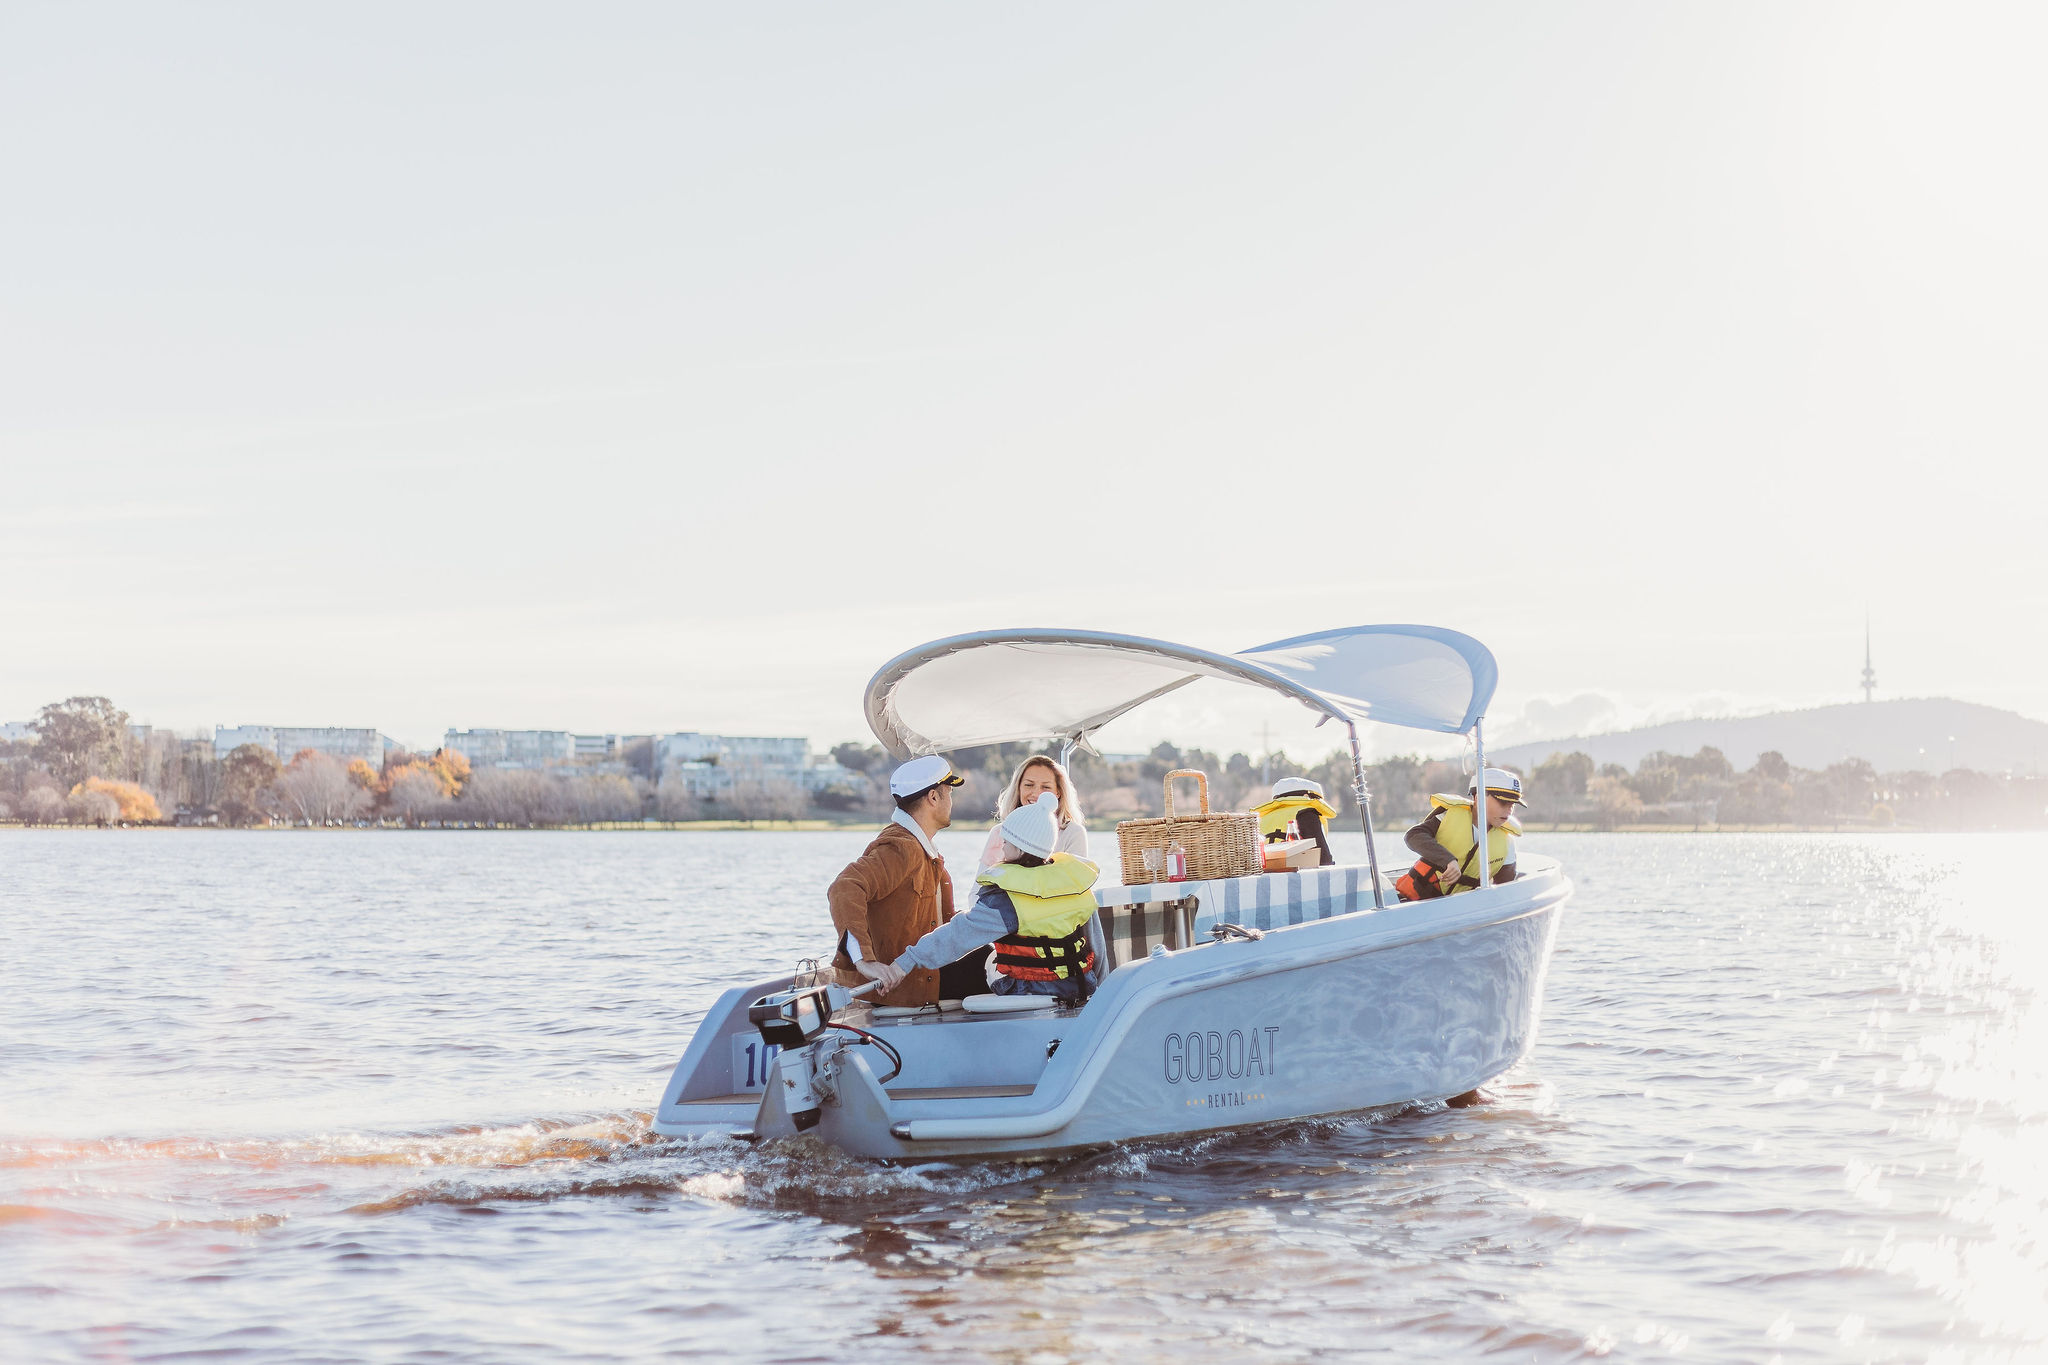 GoBoat Canberra – 1 Hour Electric Picnic Boat Hire (up to 8 people)